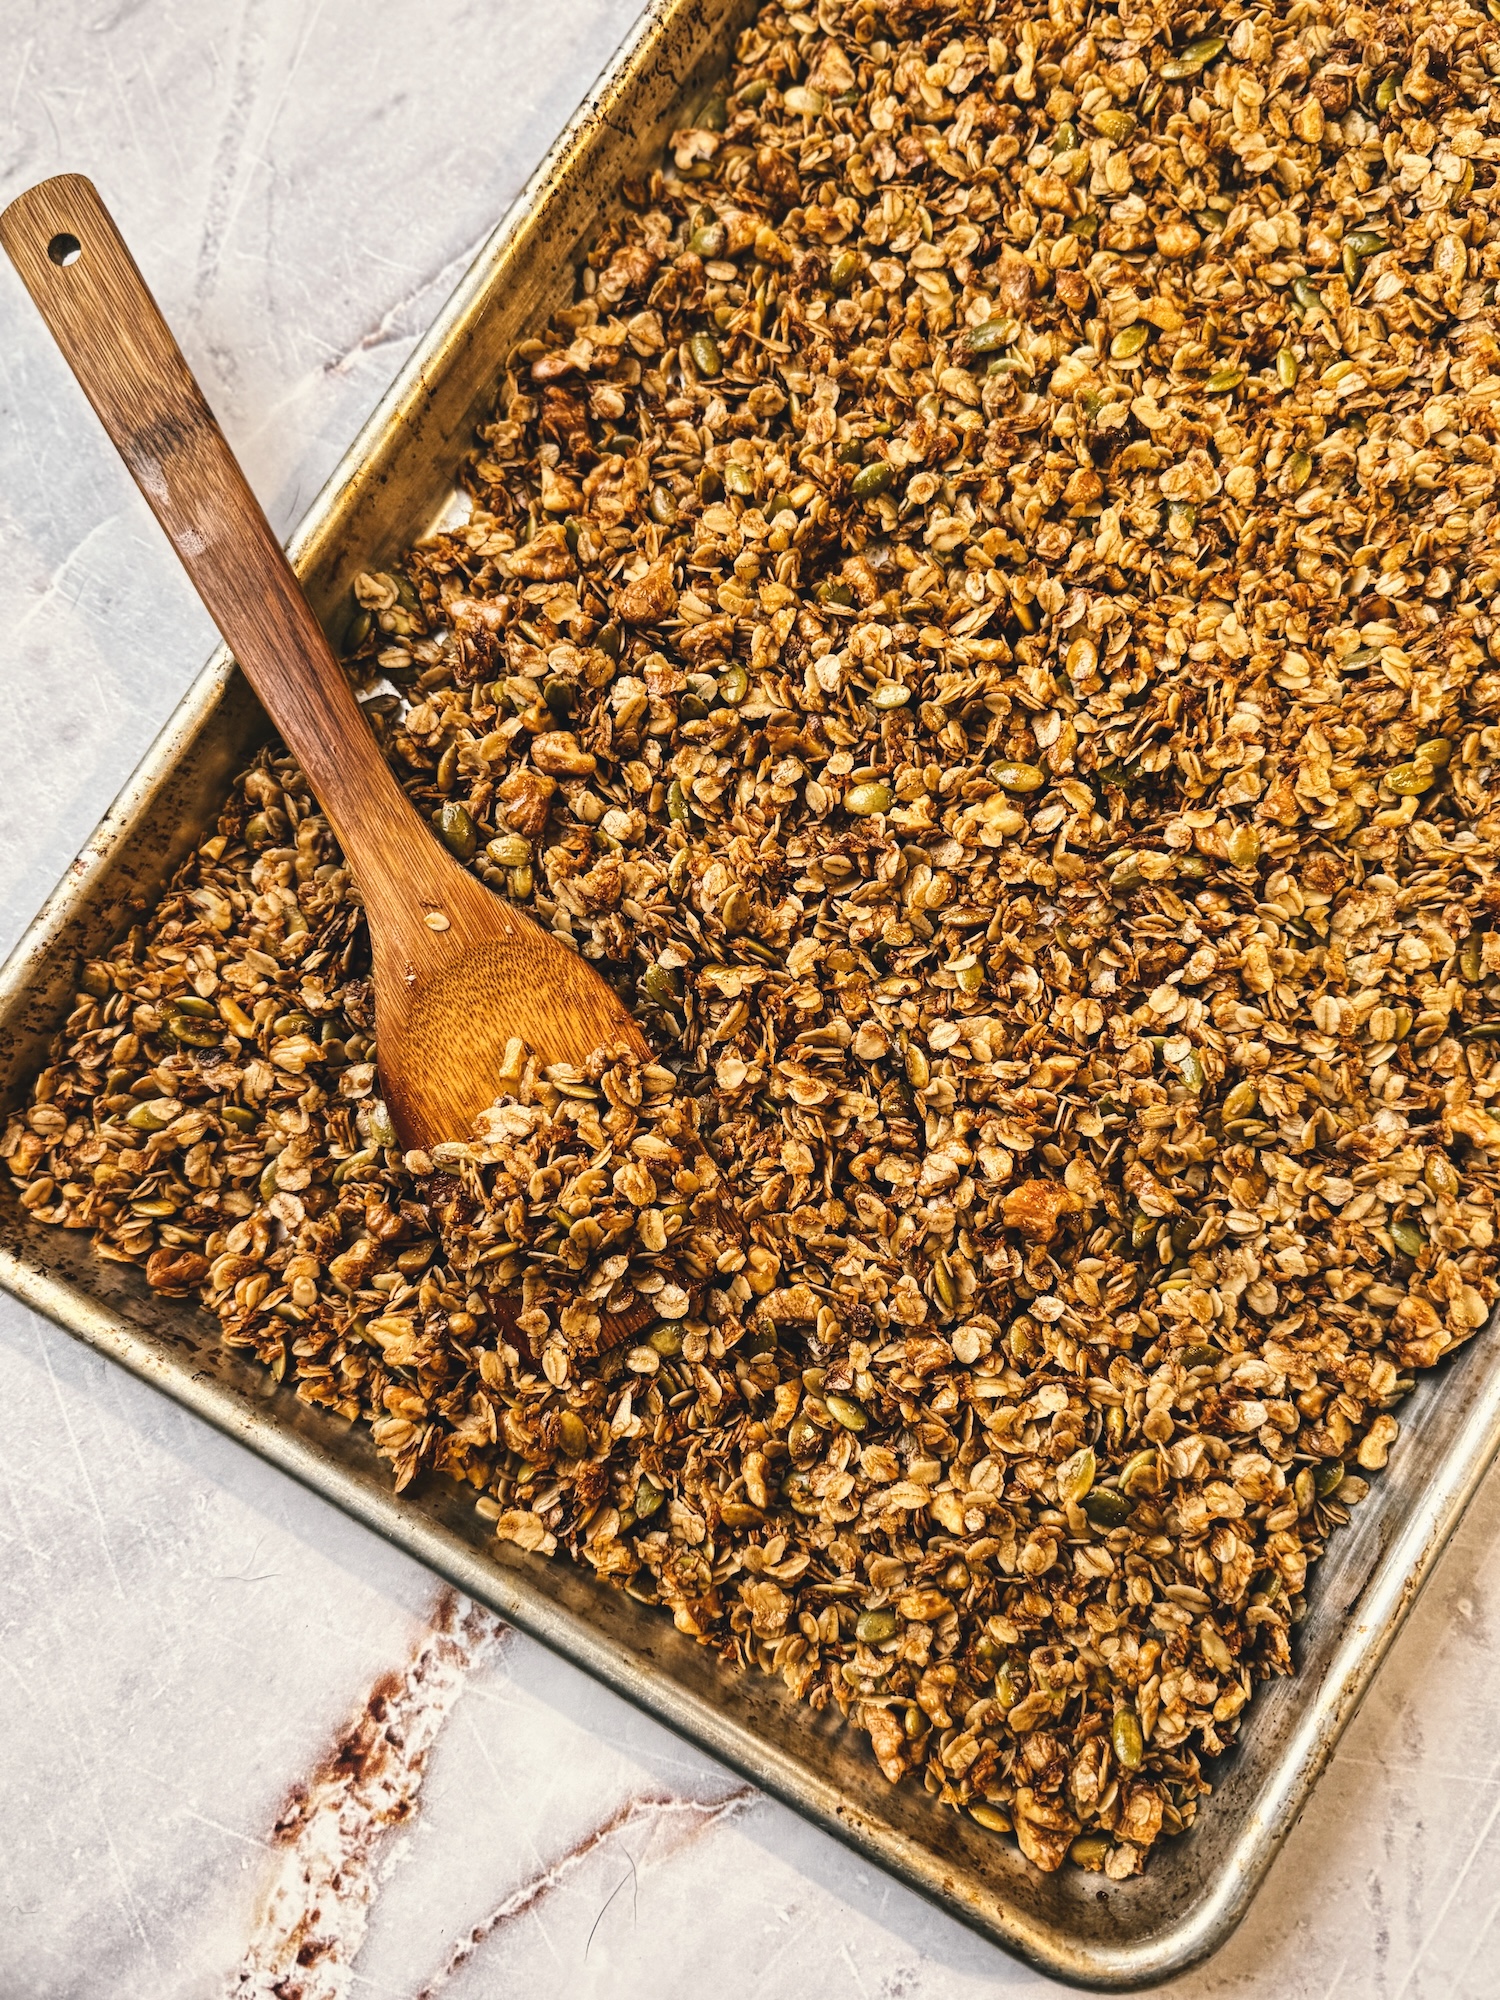 Finished homemade granola on a sheet pan with a wooden spoon